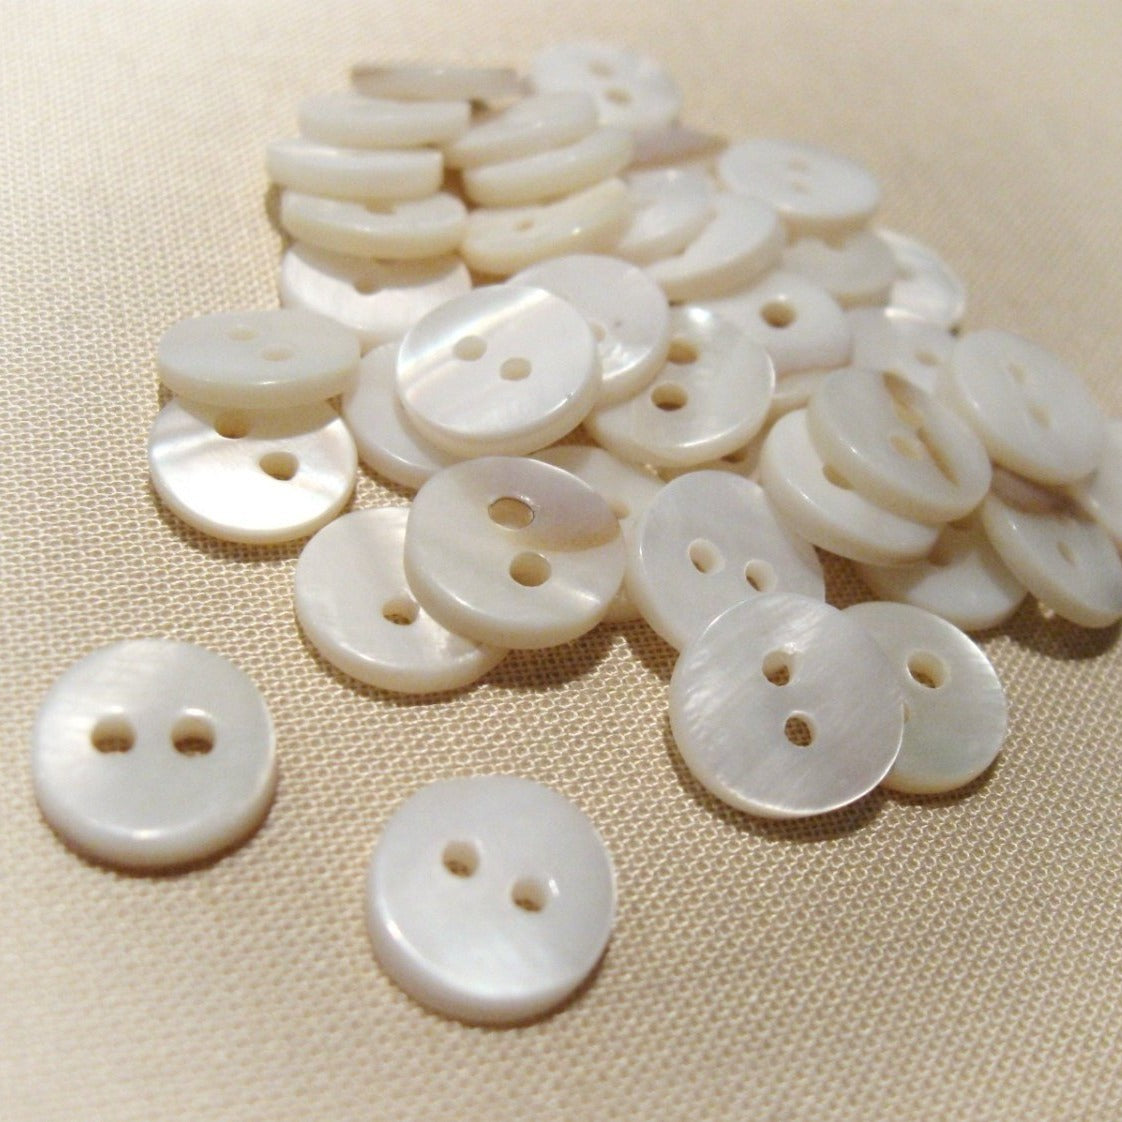 Mother of Pearl Shell Buttons 10mm - set of 10 eco friendly natural buttons